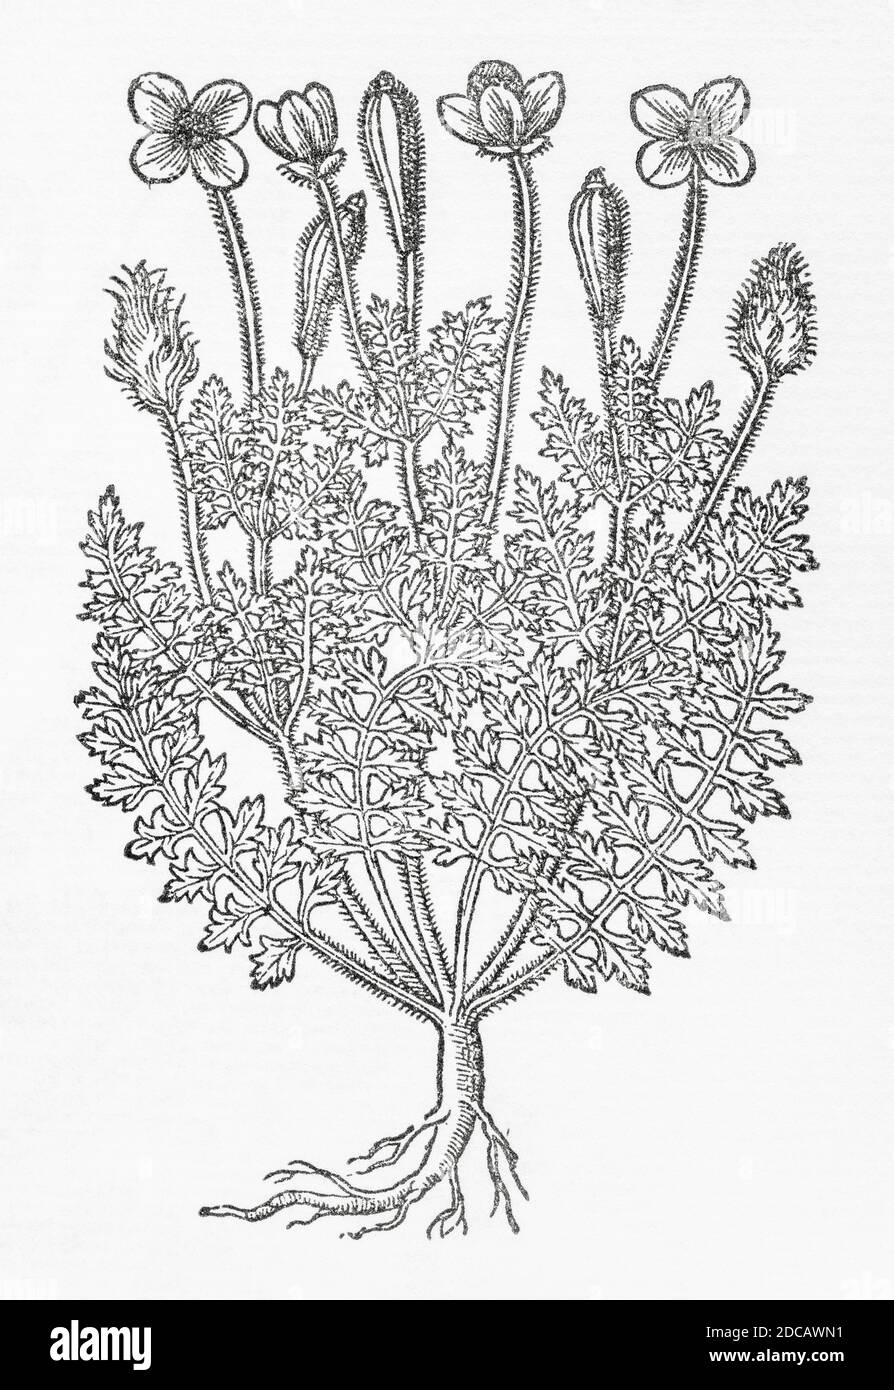 Prickly-Headed Poppy / Papaver argemone woodcut from Gerarde's Herball, History of Plants. He refers it as belonging to 'bastard wilde poppies'. P300 Stock Photo